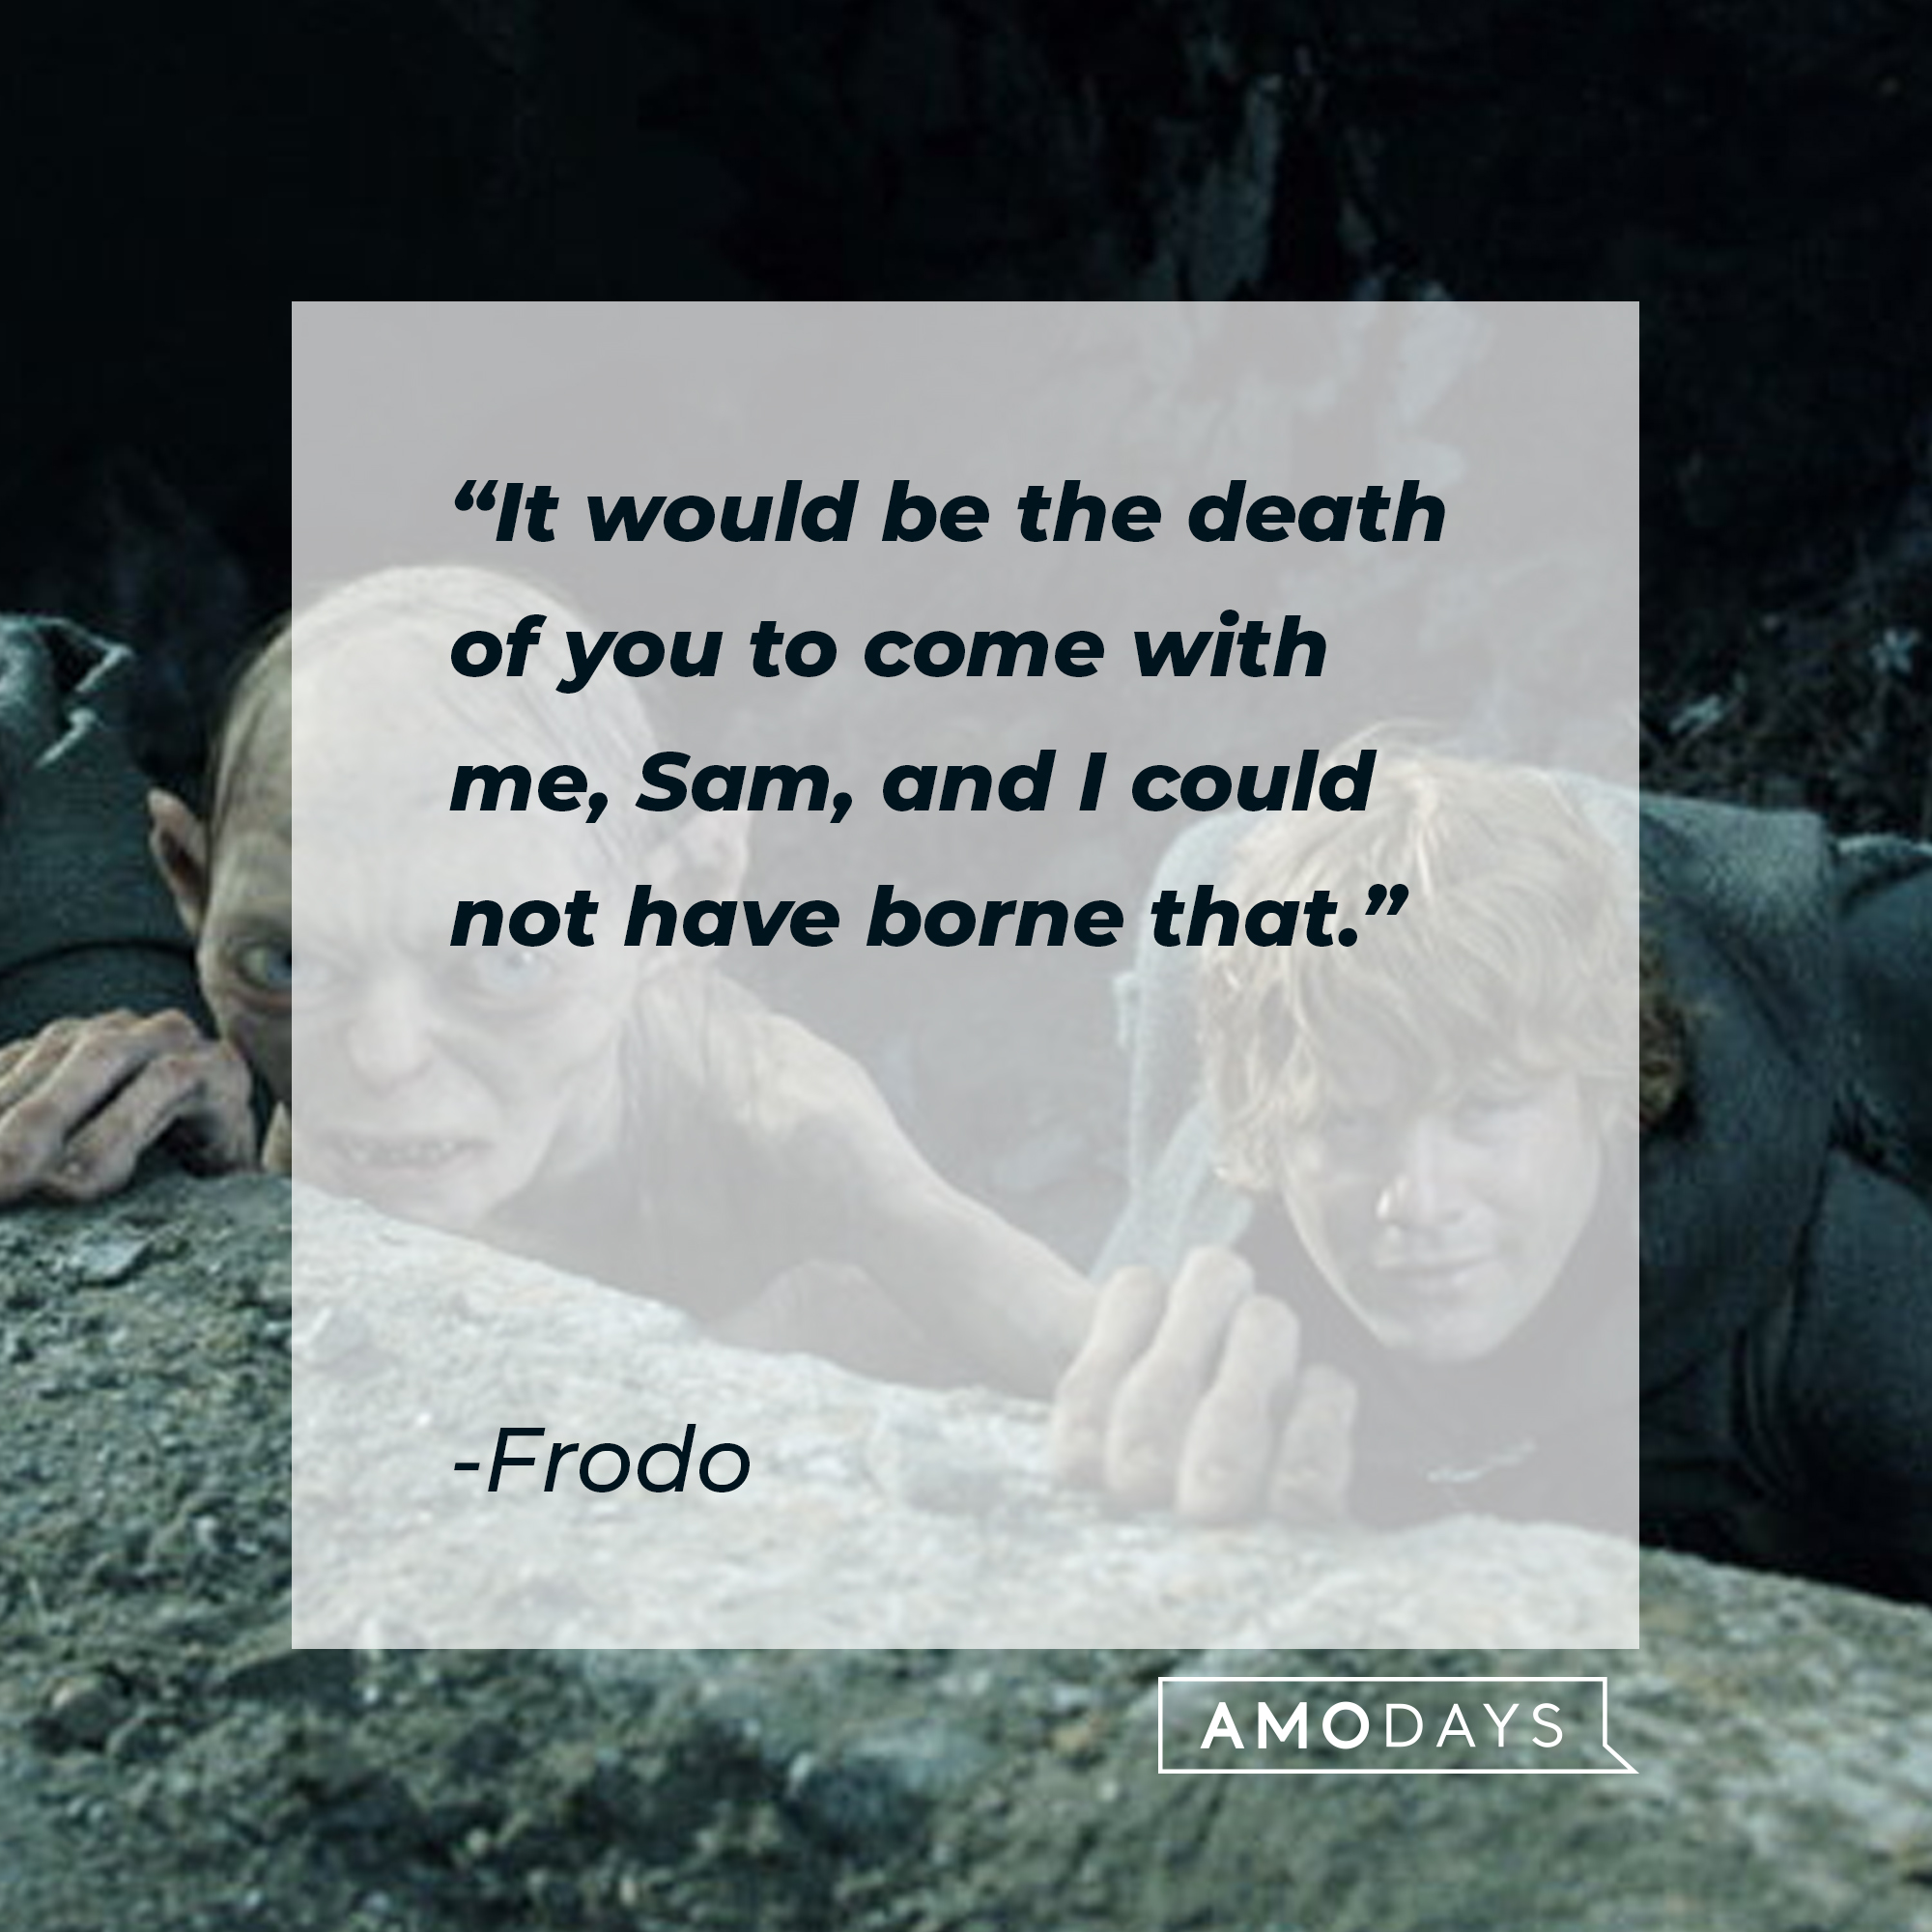 Frodo's quote: “It would be the death of you to come with me, Sam, and I could not have borne that." | Source: facebook.com/lordoftheringstrilogy